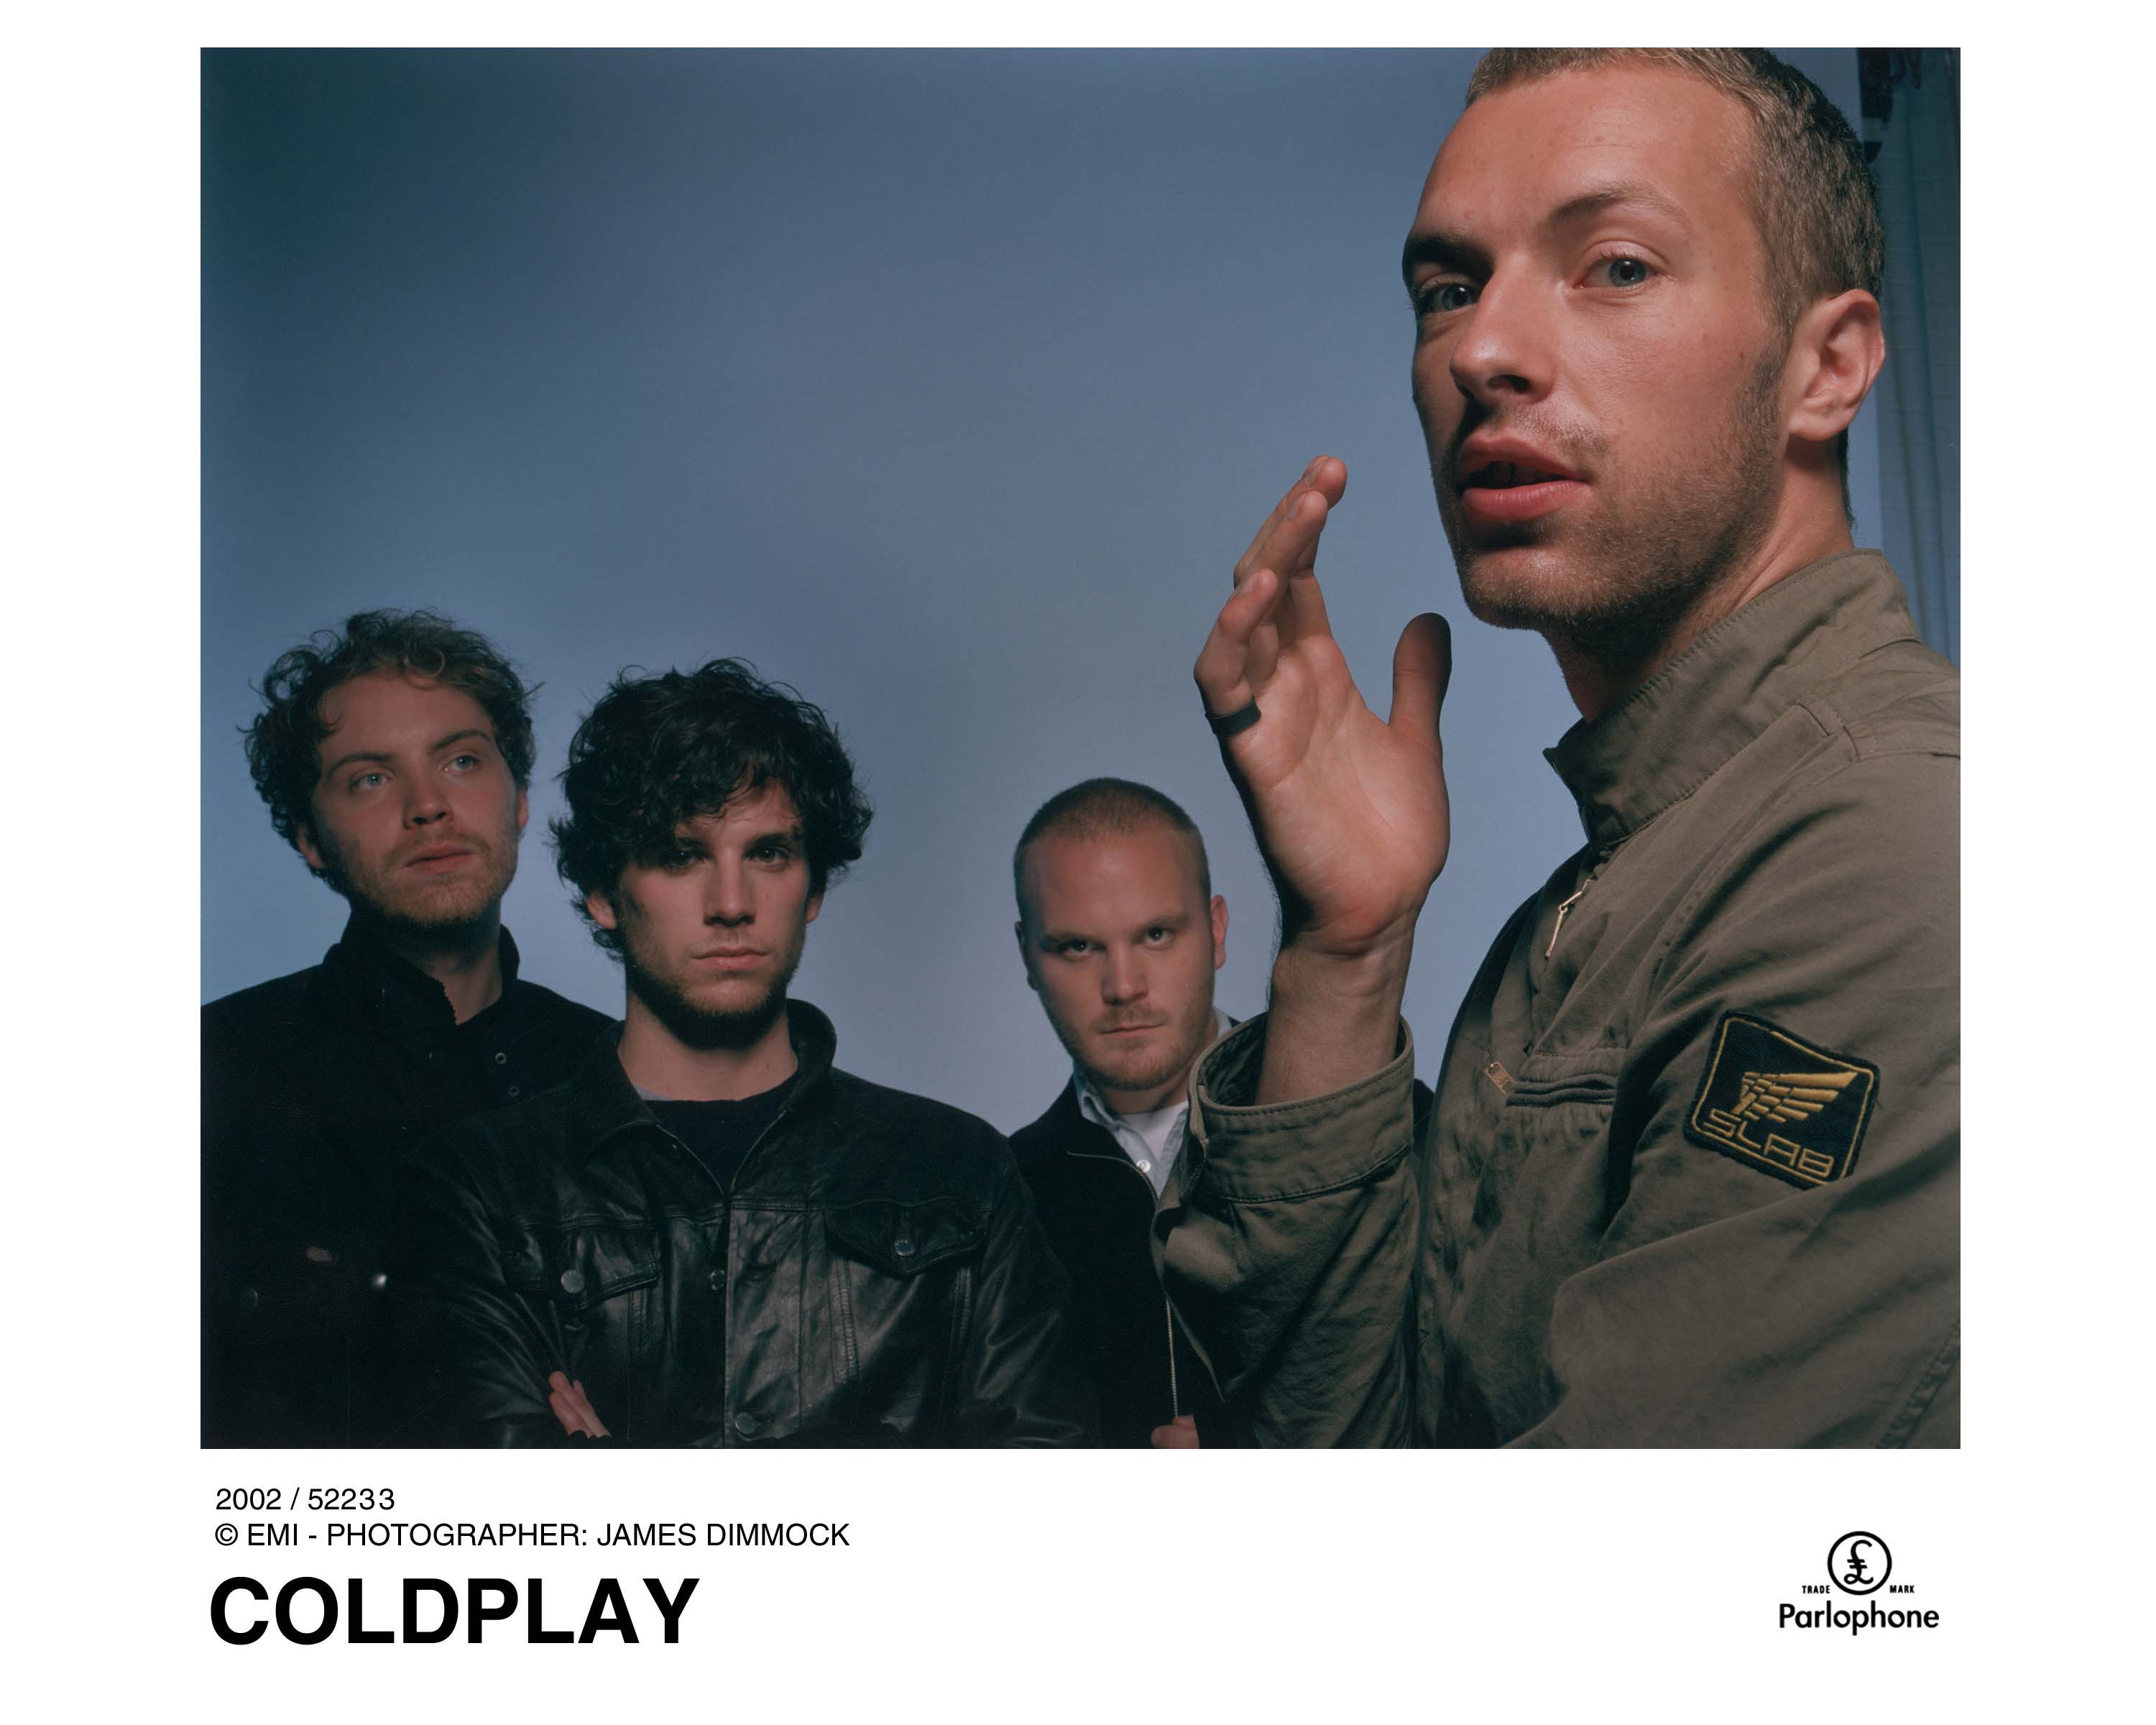 MUSIC IS EVERYTHING. - Chris Martin (Coldplay singer/keyboardist/guitarist). COLDPLAY: The Light of Music, Passion, and Development! (Photo courtesy of Capitol Records & Coldplay's Mgmt) Coldplay supports MakeTradeFair.org  [MORE]